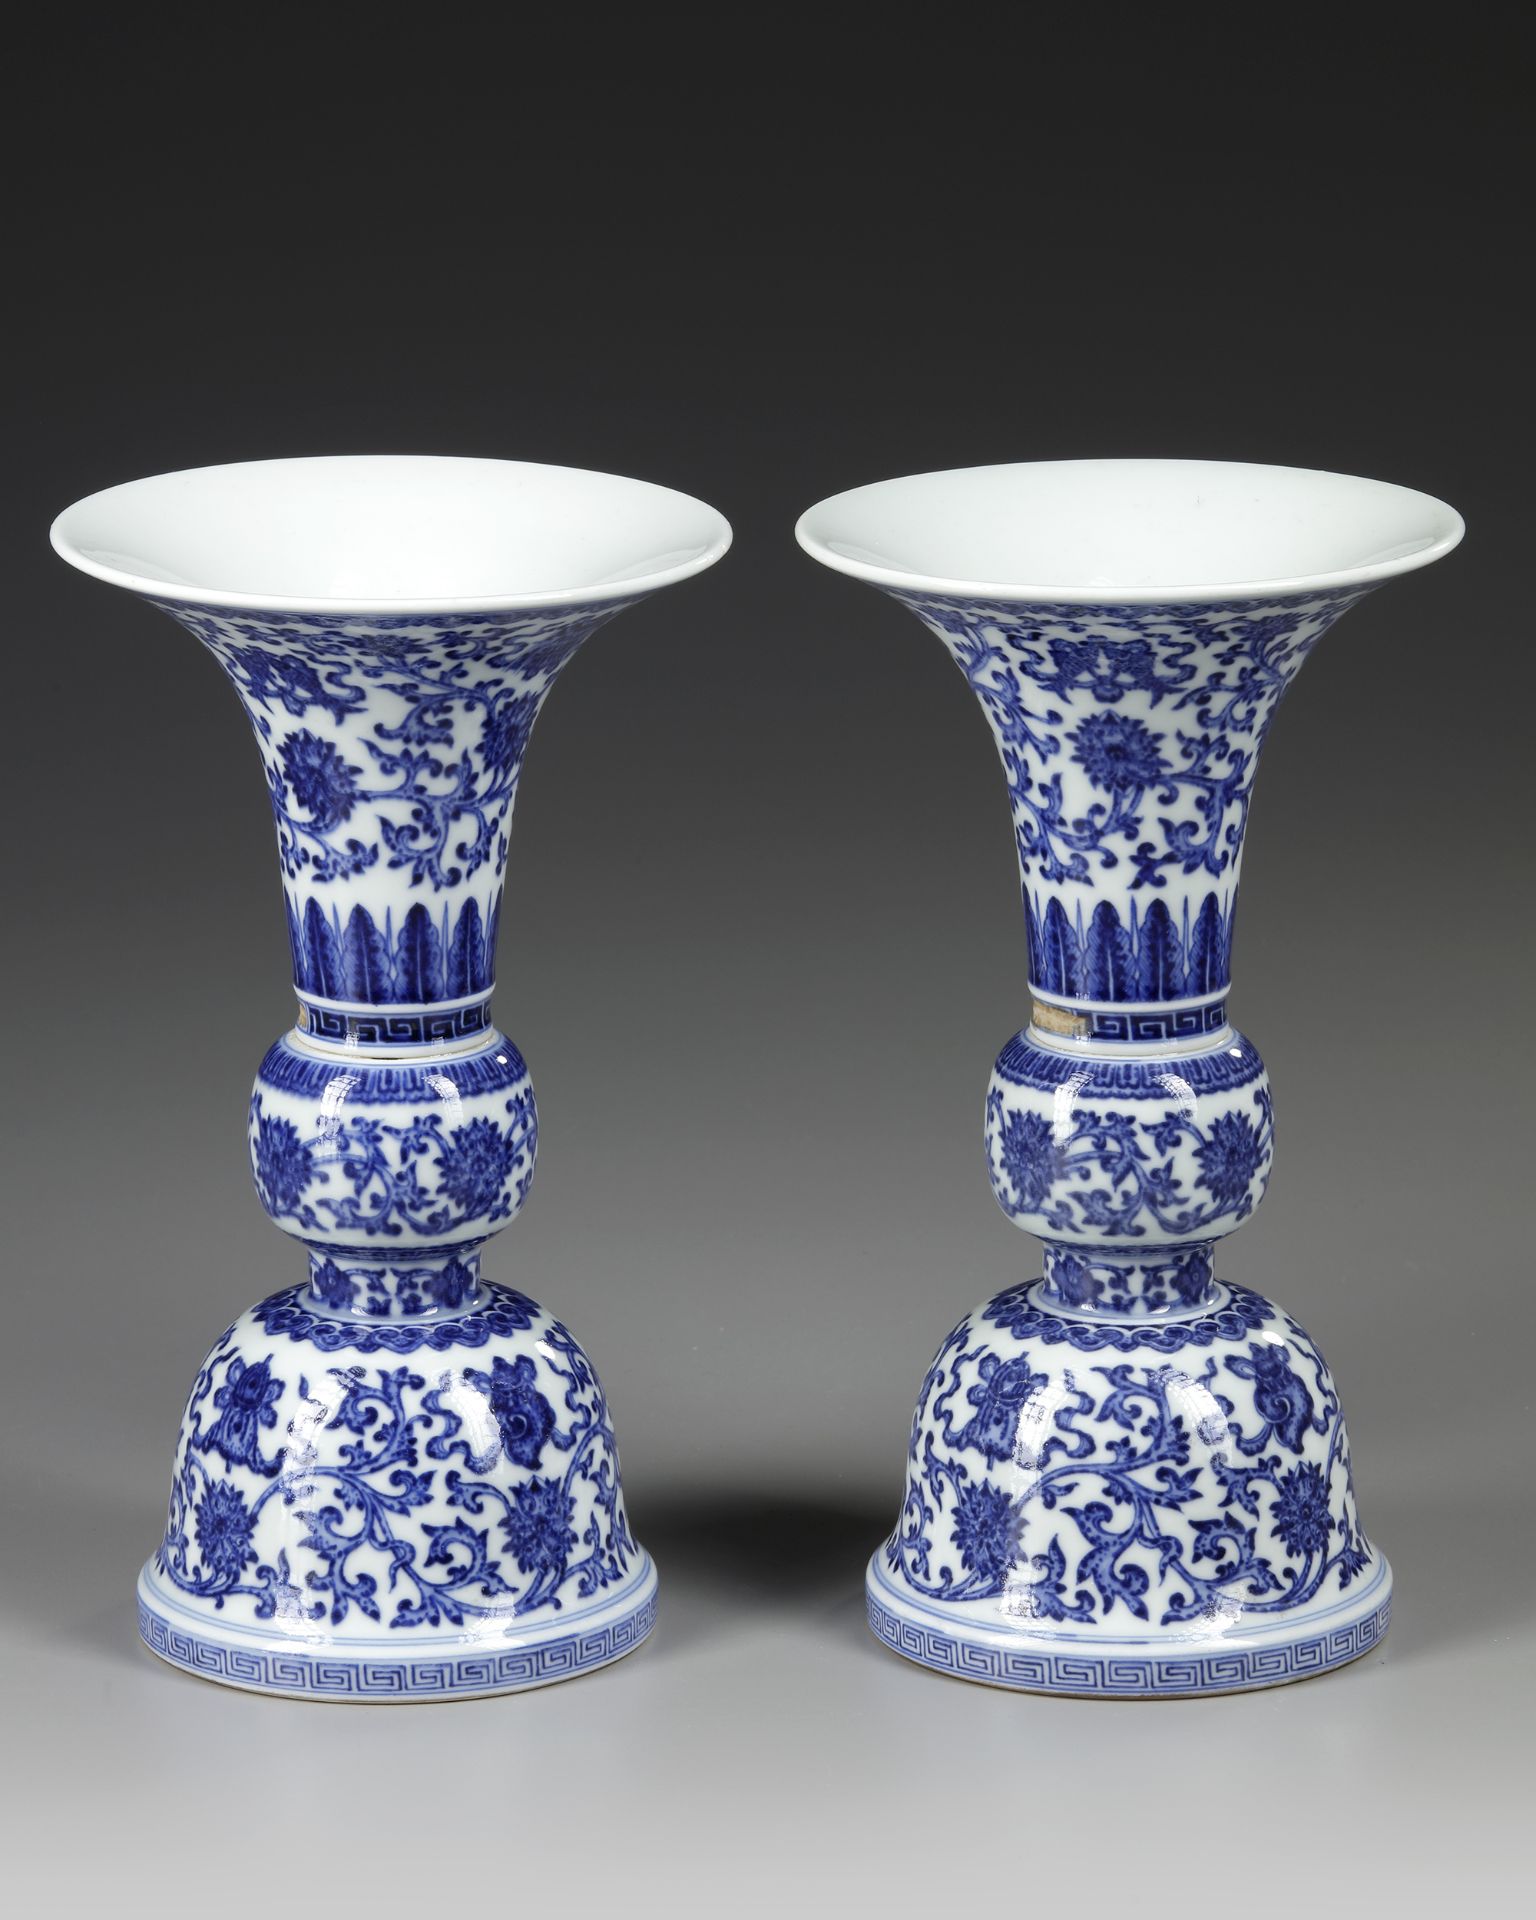 A PAIR OF CHINESE BLUE AND WHITE GU-FORM ALTAR VASES, QING DYNASTY (1644–1911) - Image 4 of 8